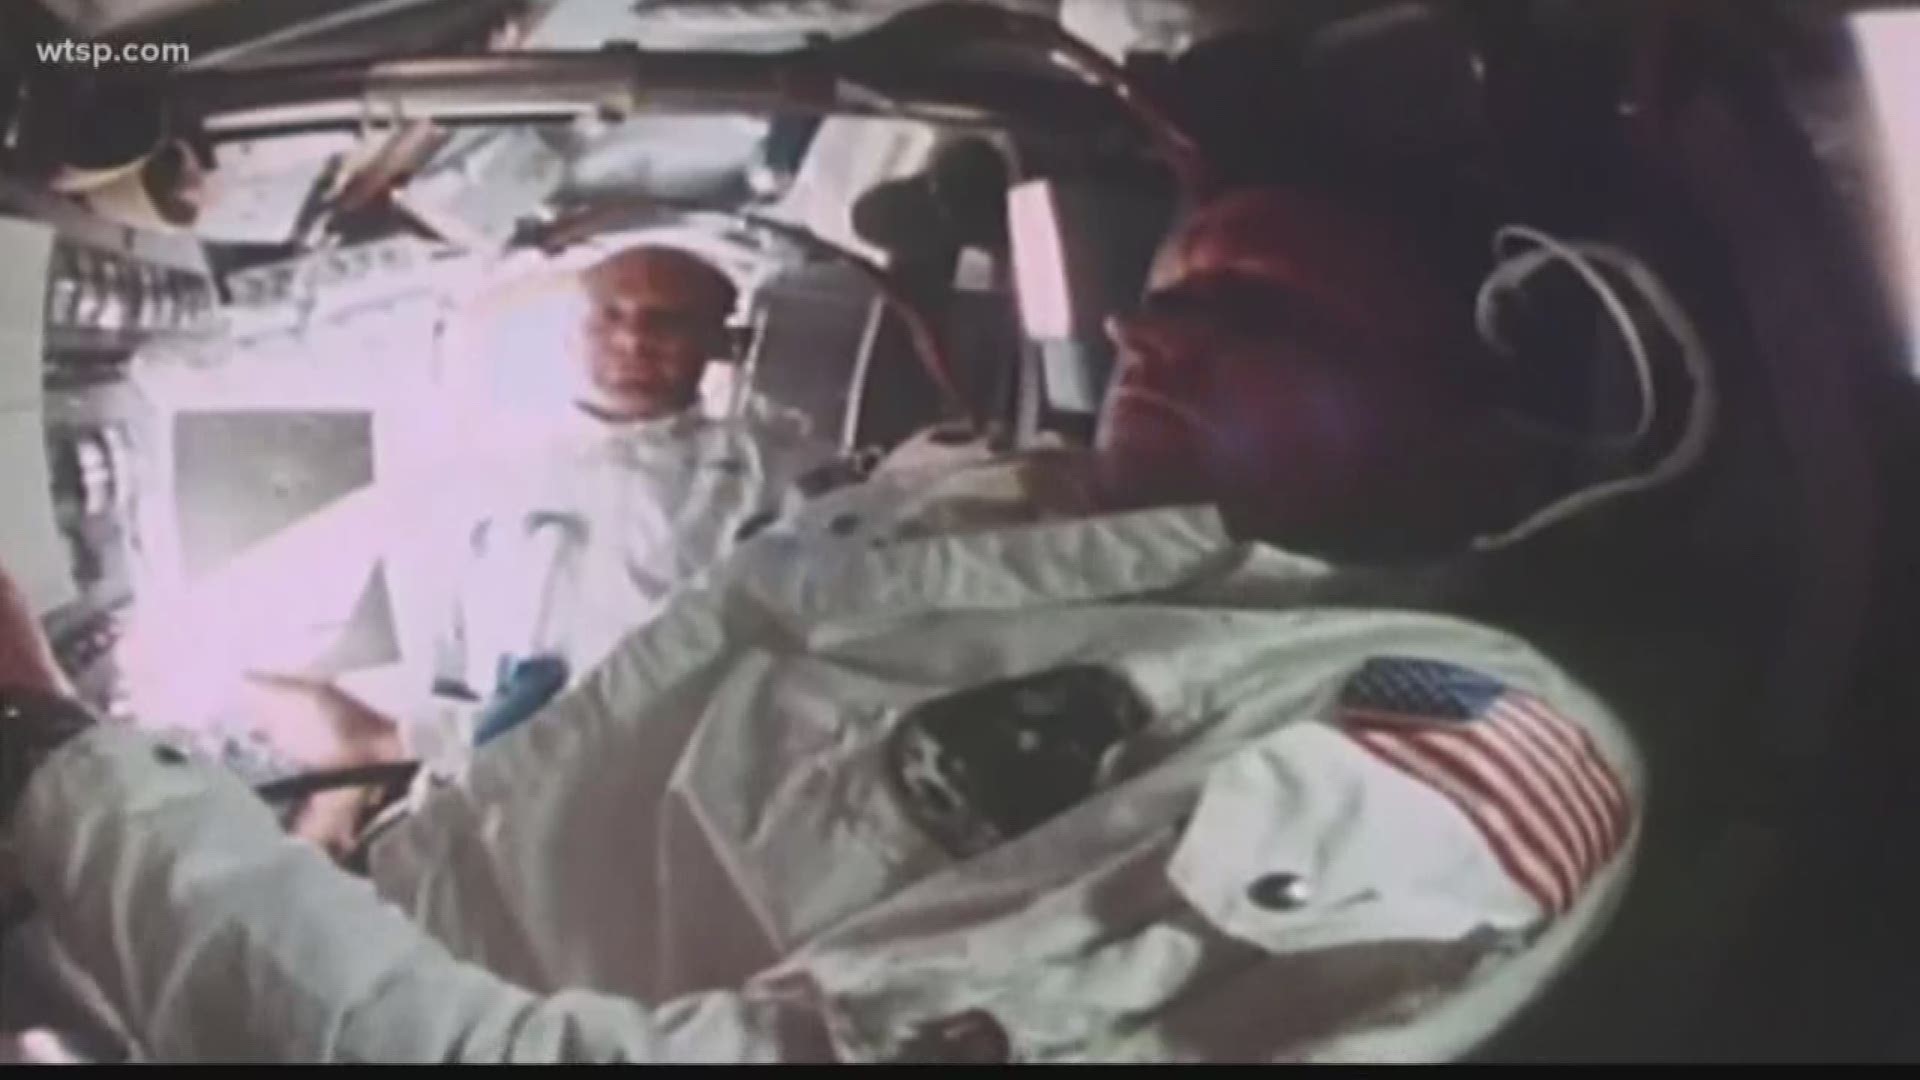 Fifty years after Neil Armstrong, Buzz Aldrin and Michael Collins became etched in history, the Apollo 11 mission remains an iconic moment in American history. It's estimated that between 600-650 million people tuned in around the world to Armstrong and Aldrin's broadcast from the lunar surface on July 20, 1969. https://on.wtsp.com/2JHknQF